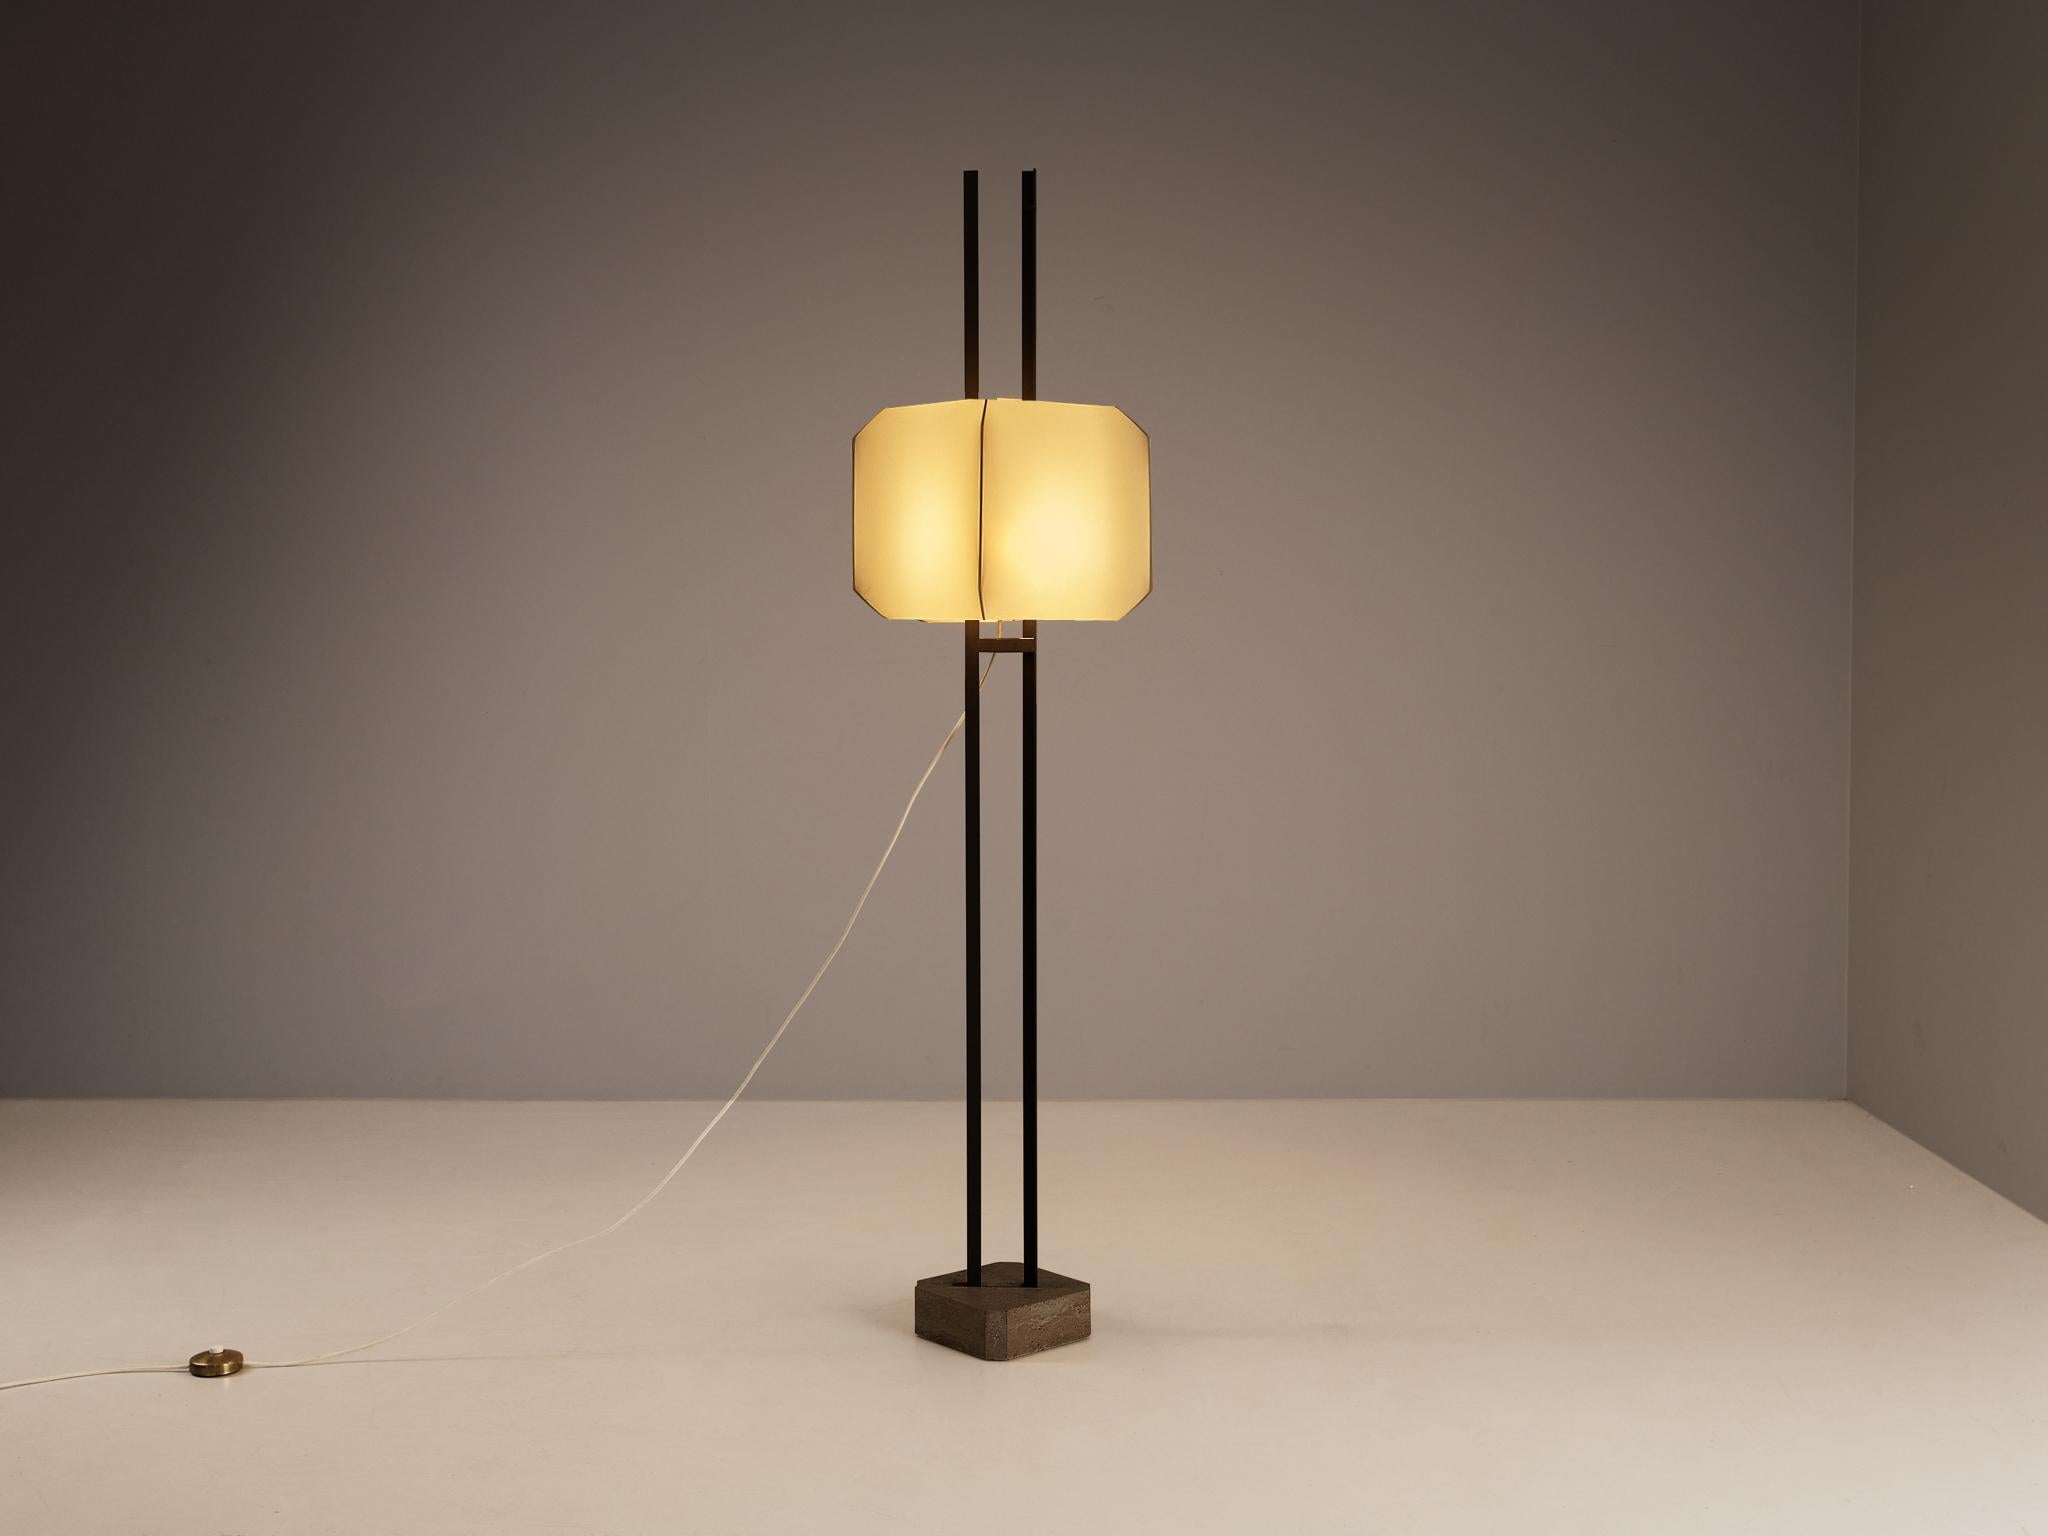 Bruno Munari for Danese, ‘Bali’ floor lamp, model ‘2003C’, travertine, plastic (PVC), lacquered steel, Italy, 1958

This floor lamp (1958) is designed by Bruno Munari for Danese and is part of the ‘Bali’ series. Munari made significant